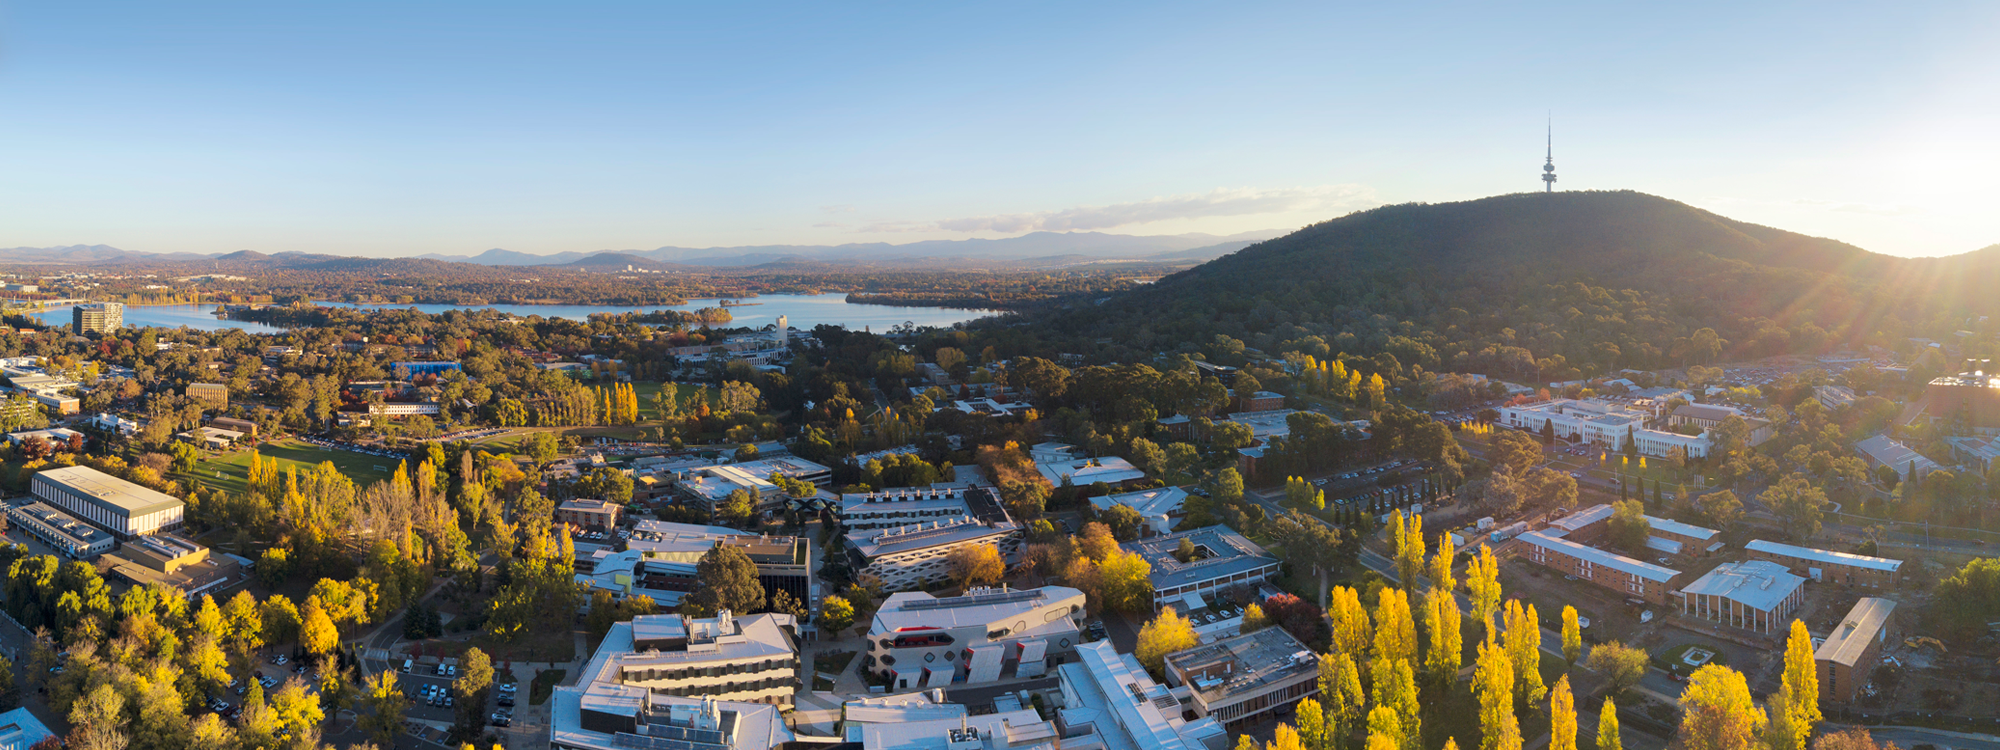 Aerial view of the ANU campus